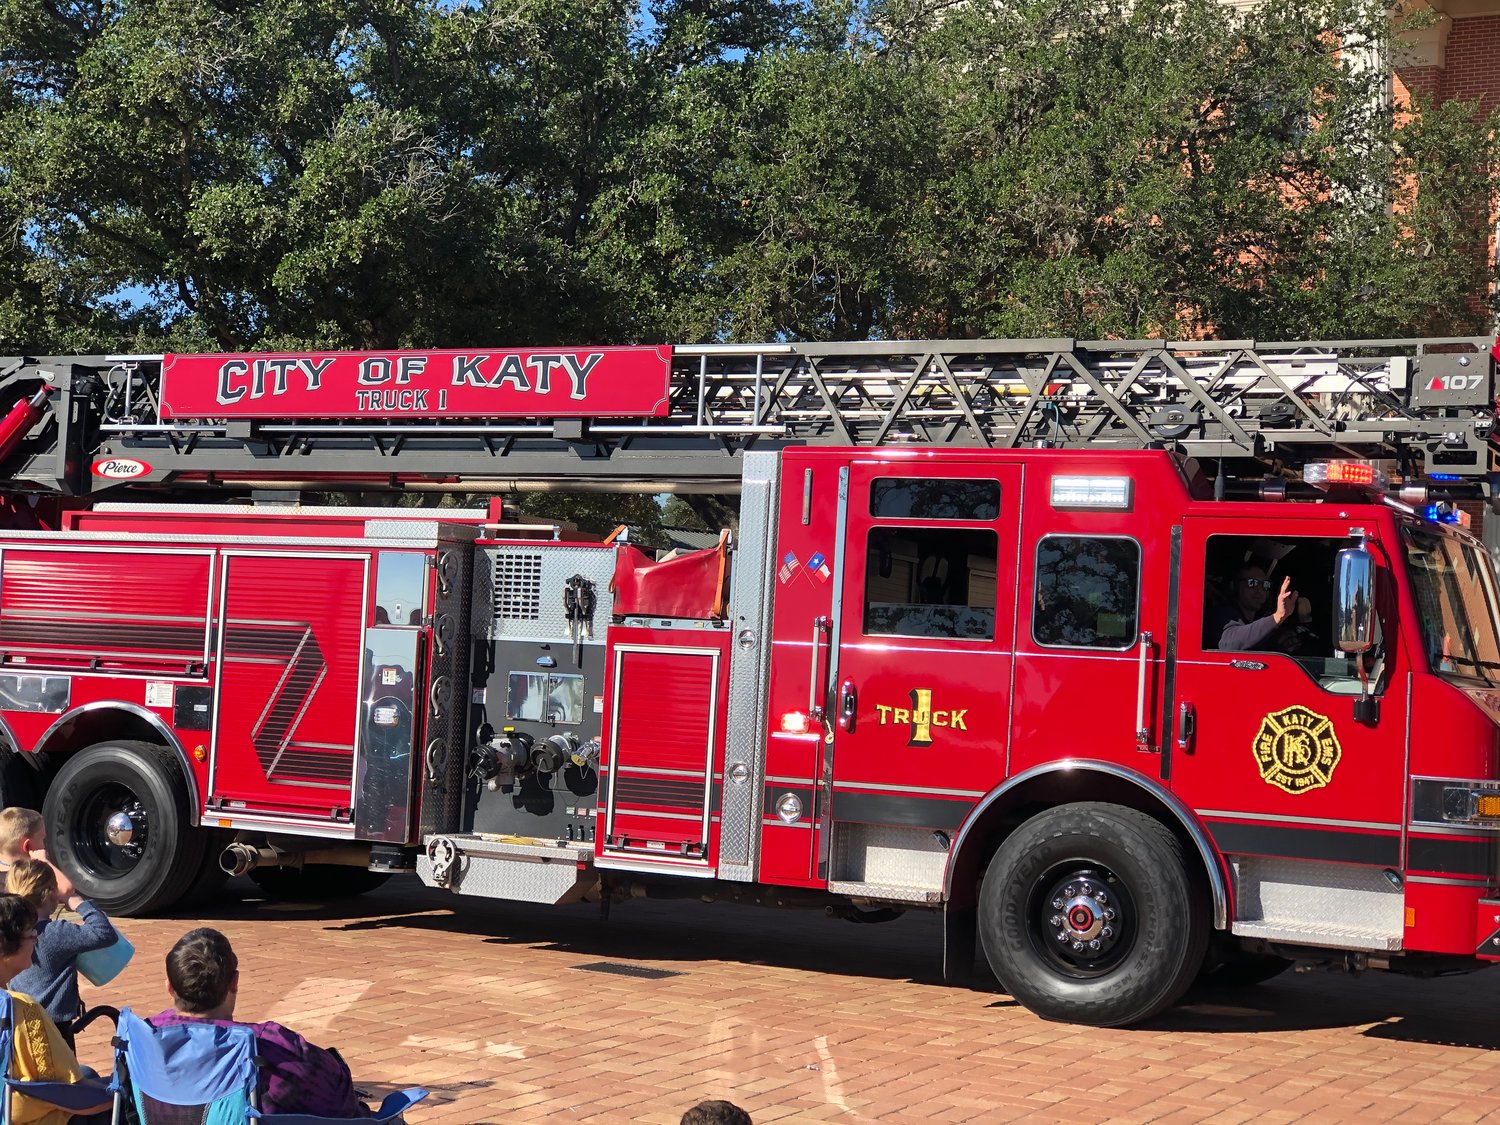 Katy Fire Truck No. 1 made an appearance at the parade.